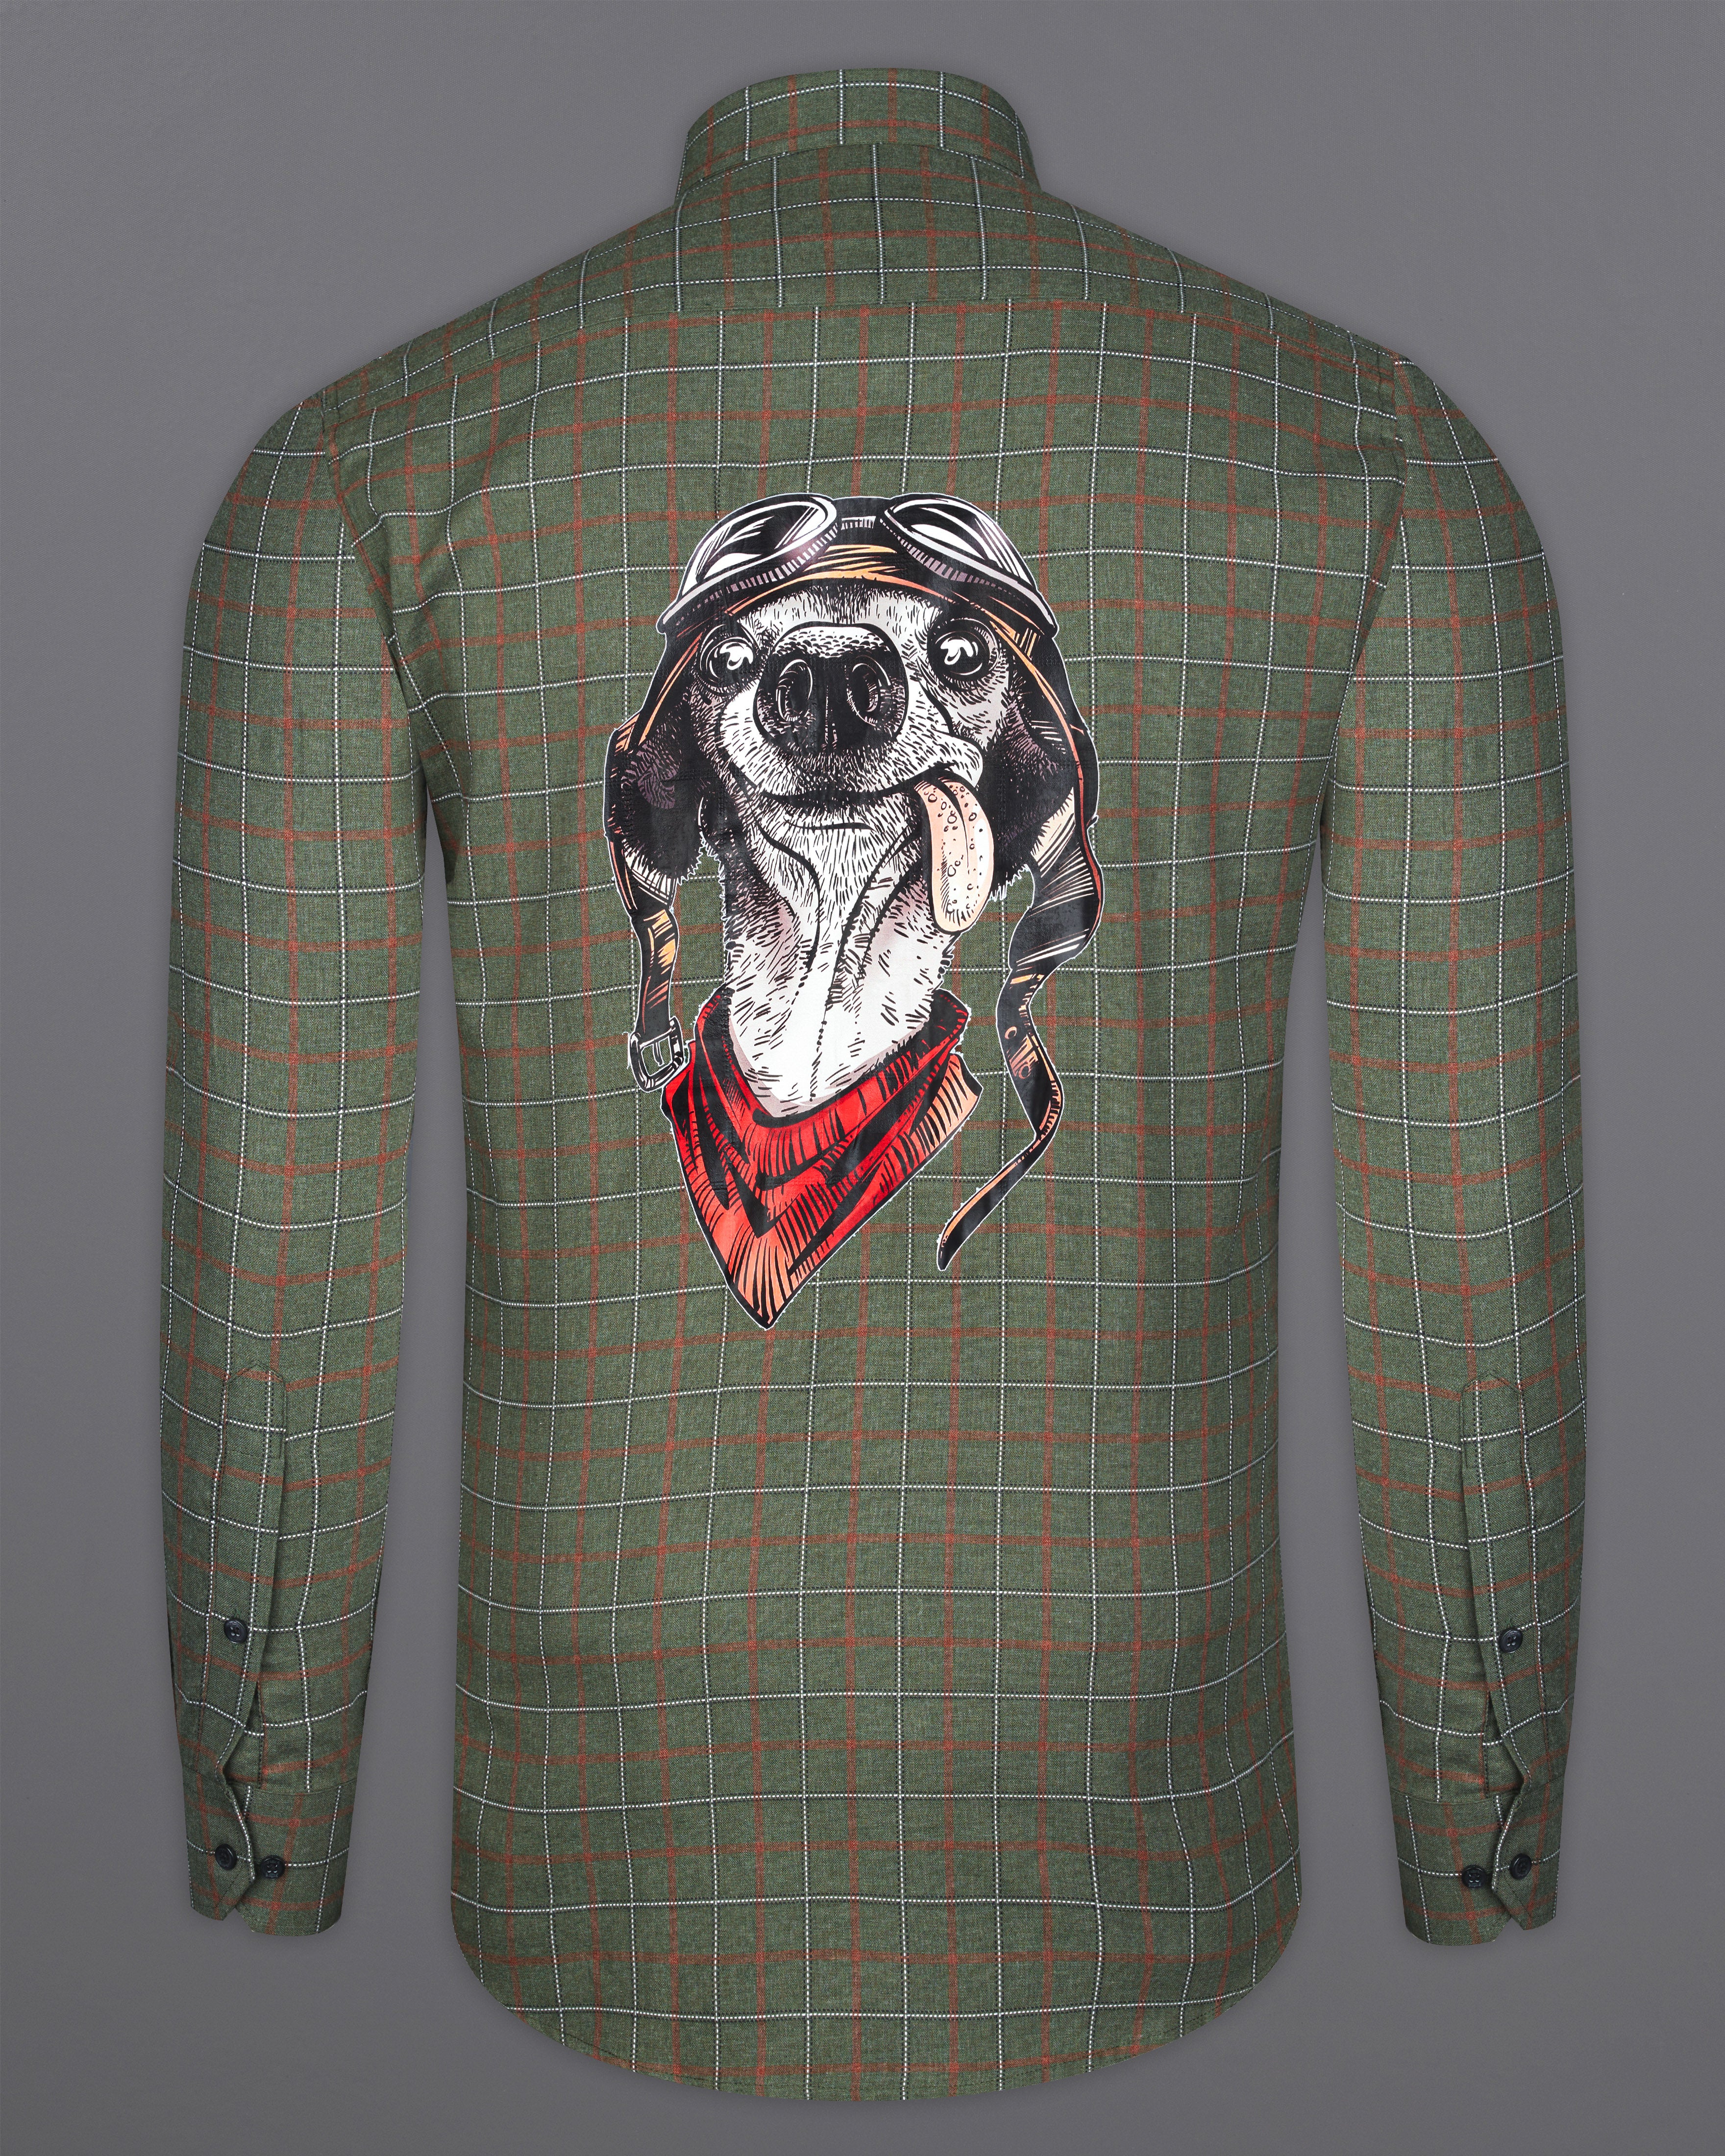 Asparagus Green with Chestnut Brown Checkered with Comical Dog Printed Super Soft Premium Cotton Designer Shirt